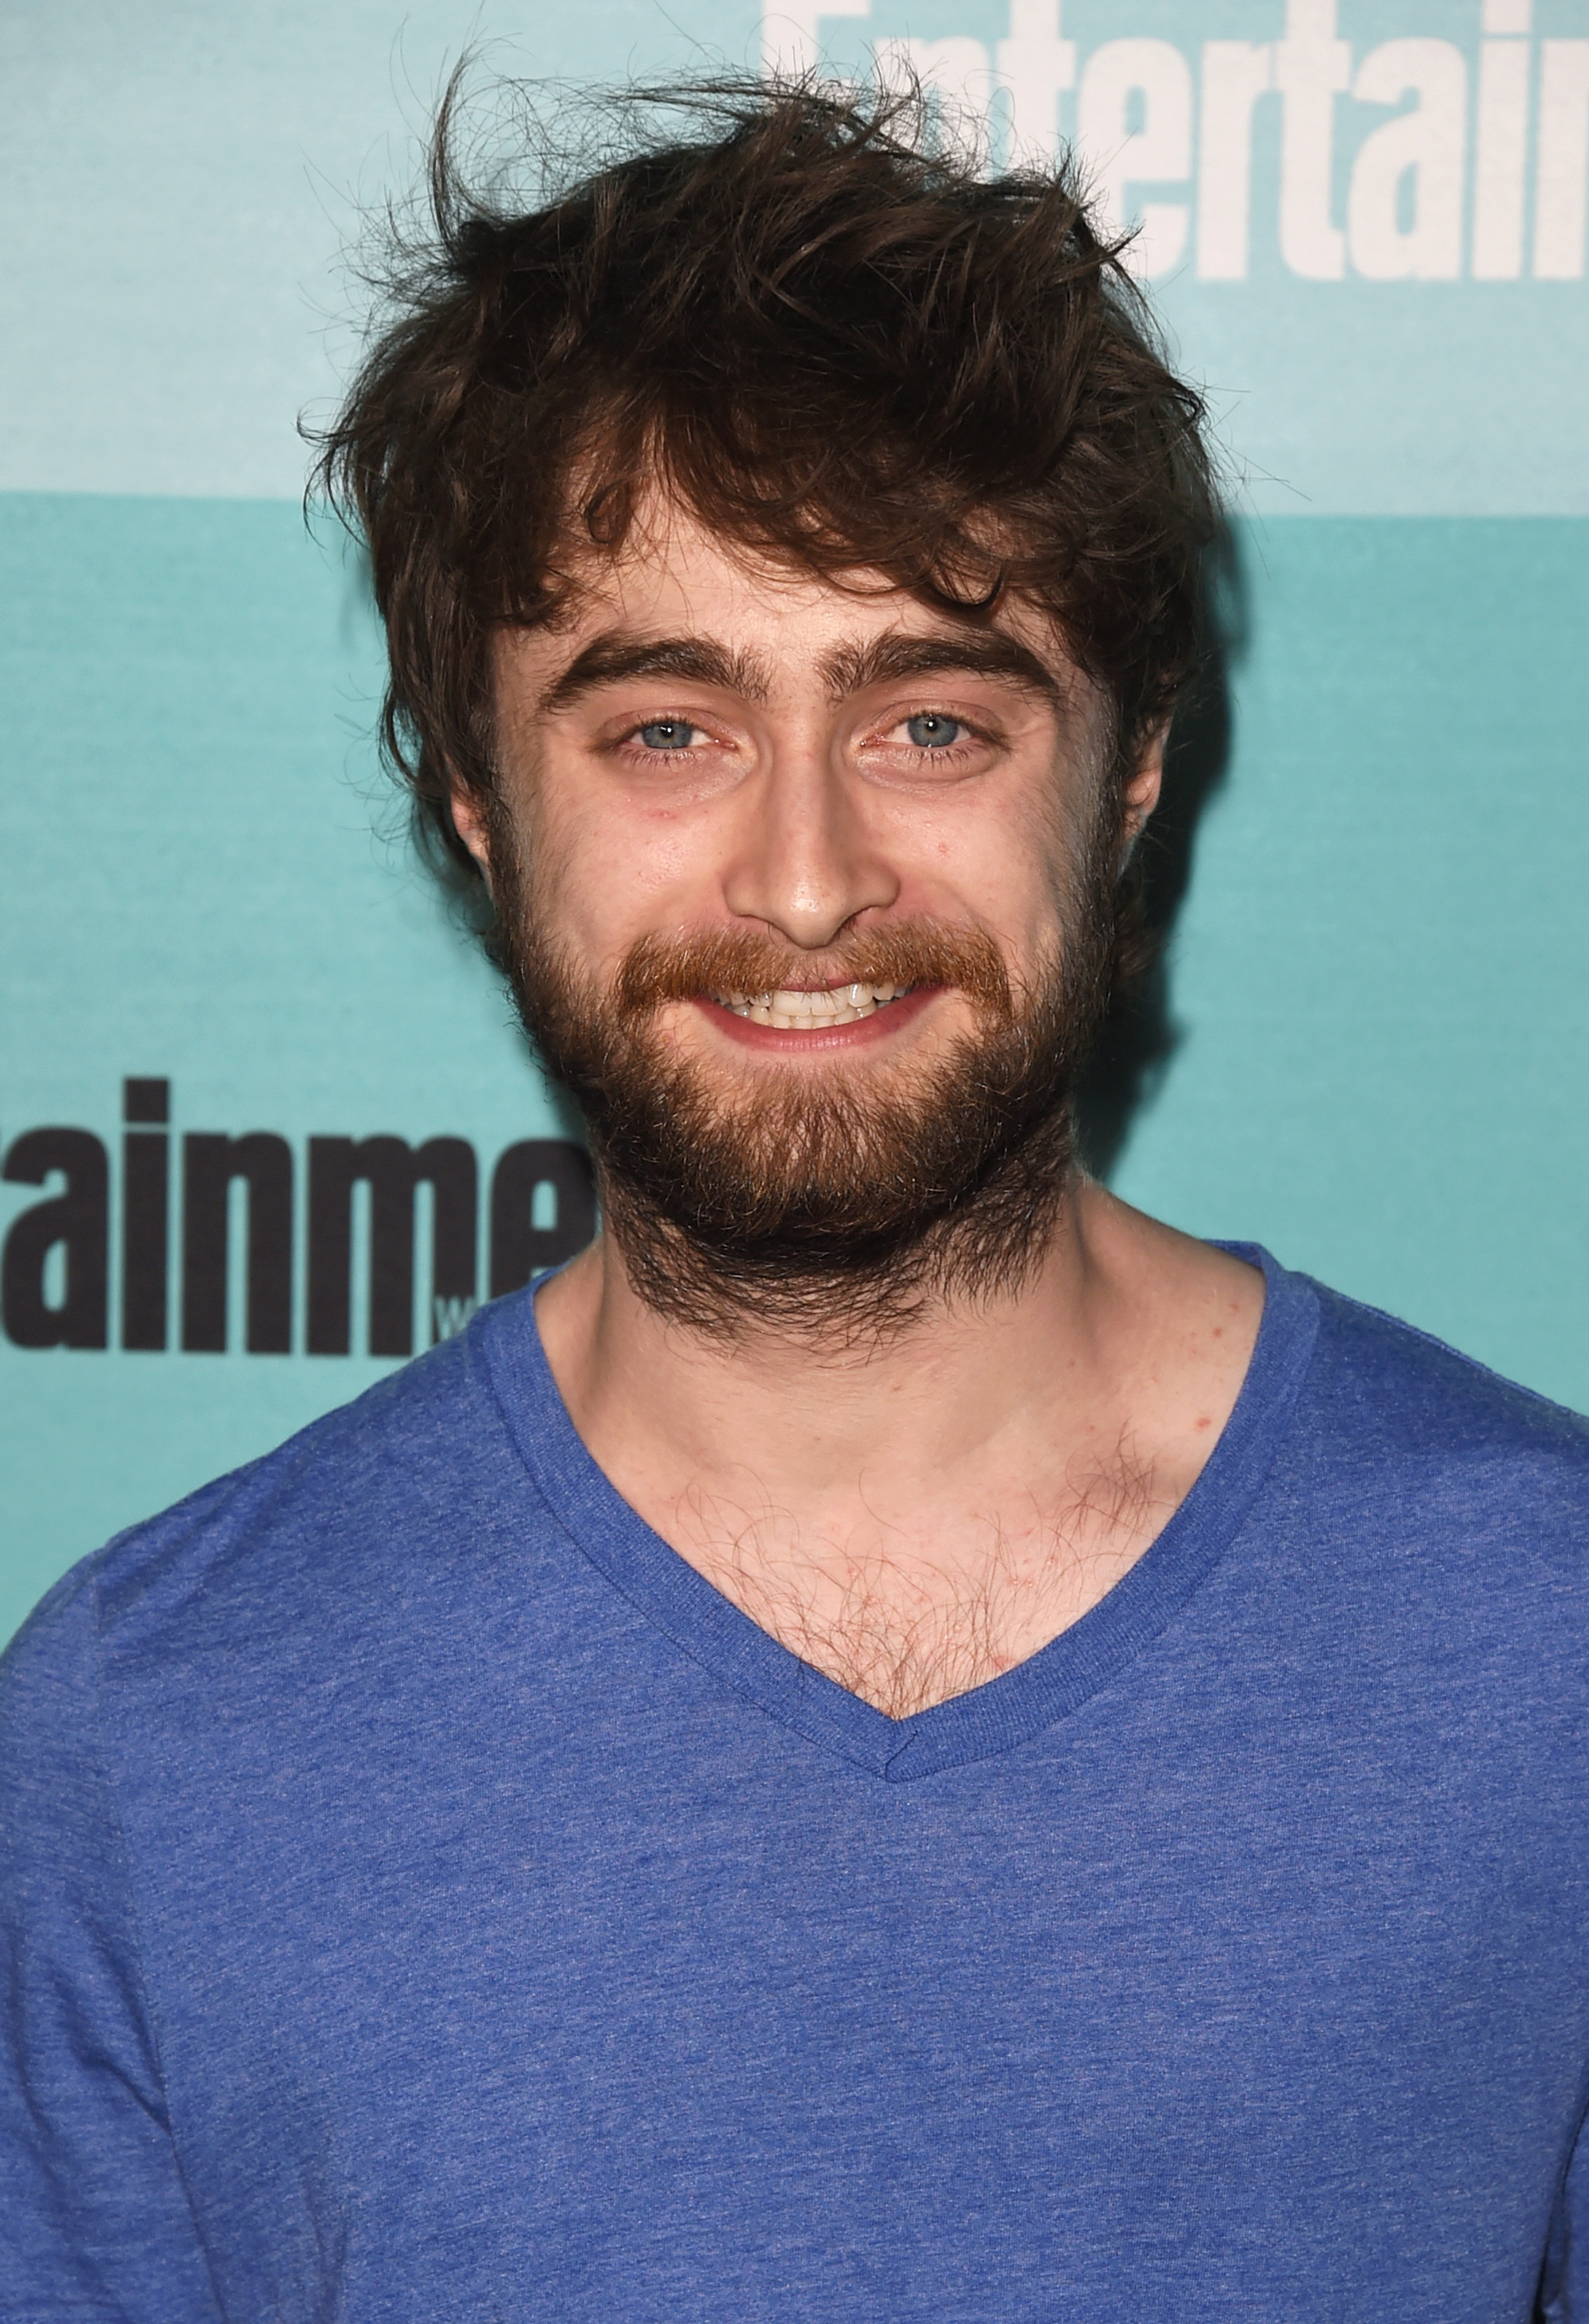 Daniel Radcliffe Doesn't Look Like This Anymore.